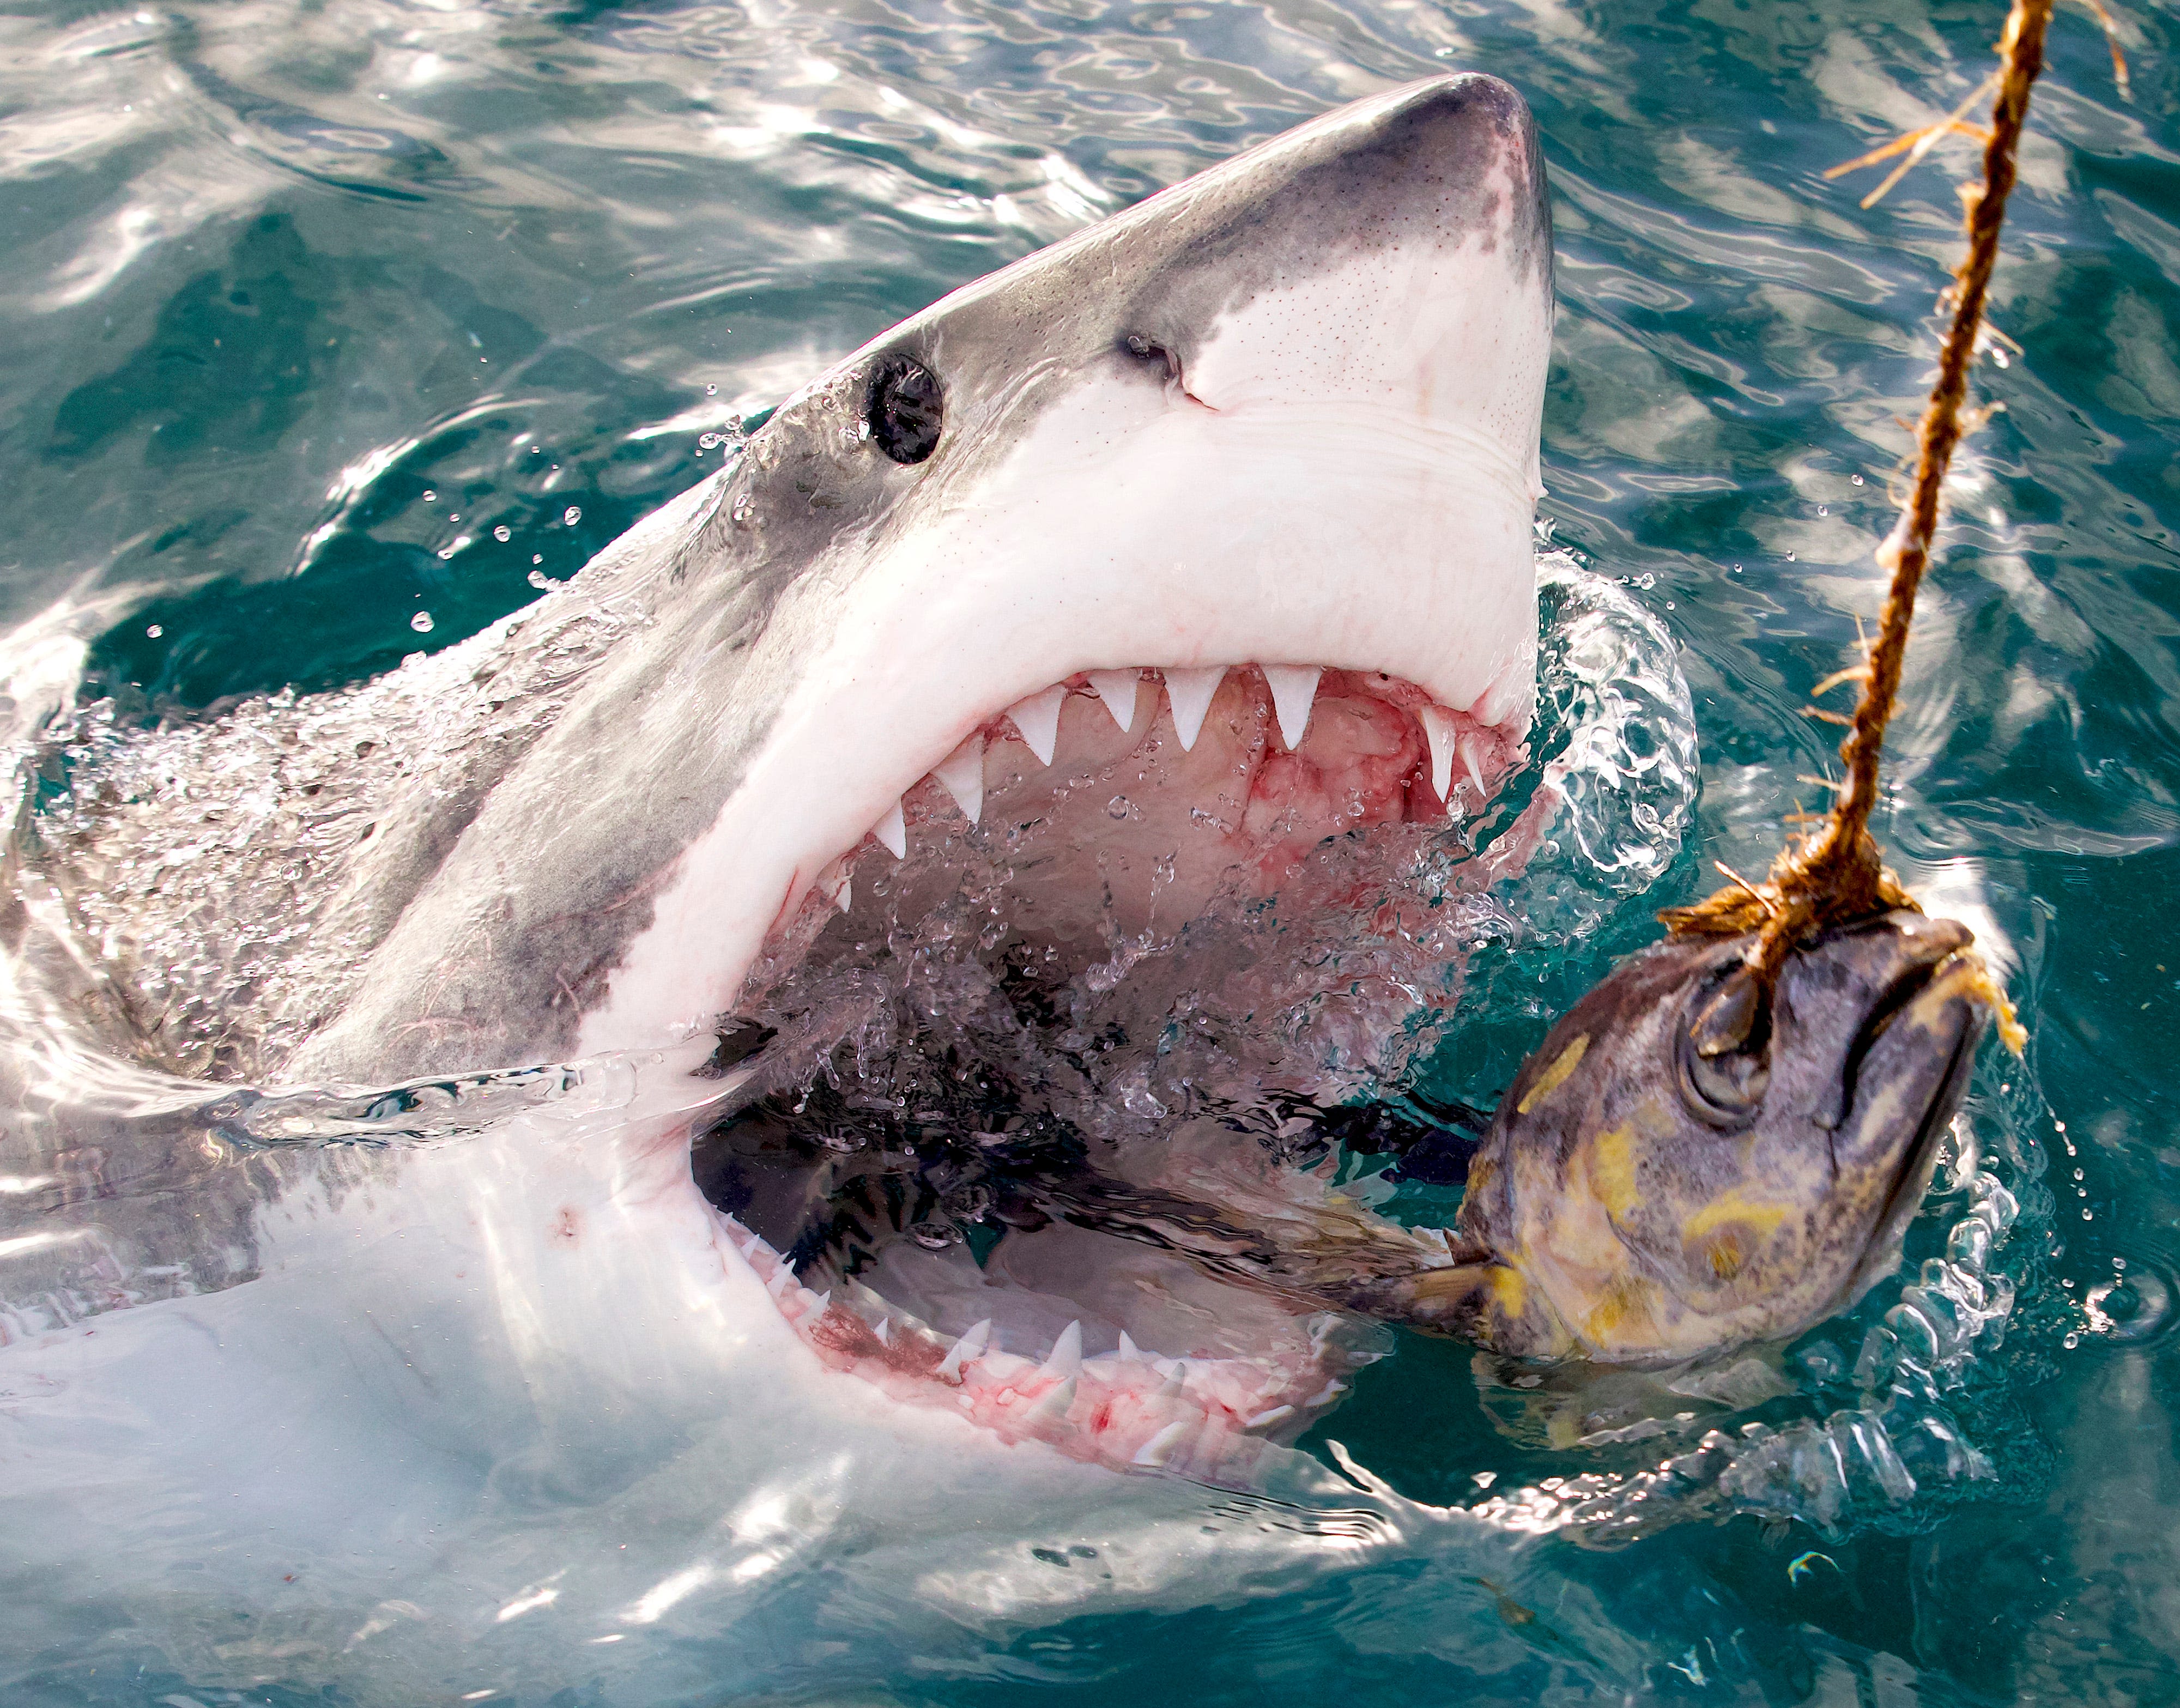 Great white sharks in New Jersey may be a thing